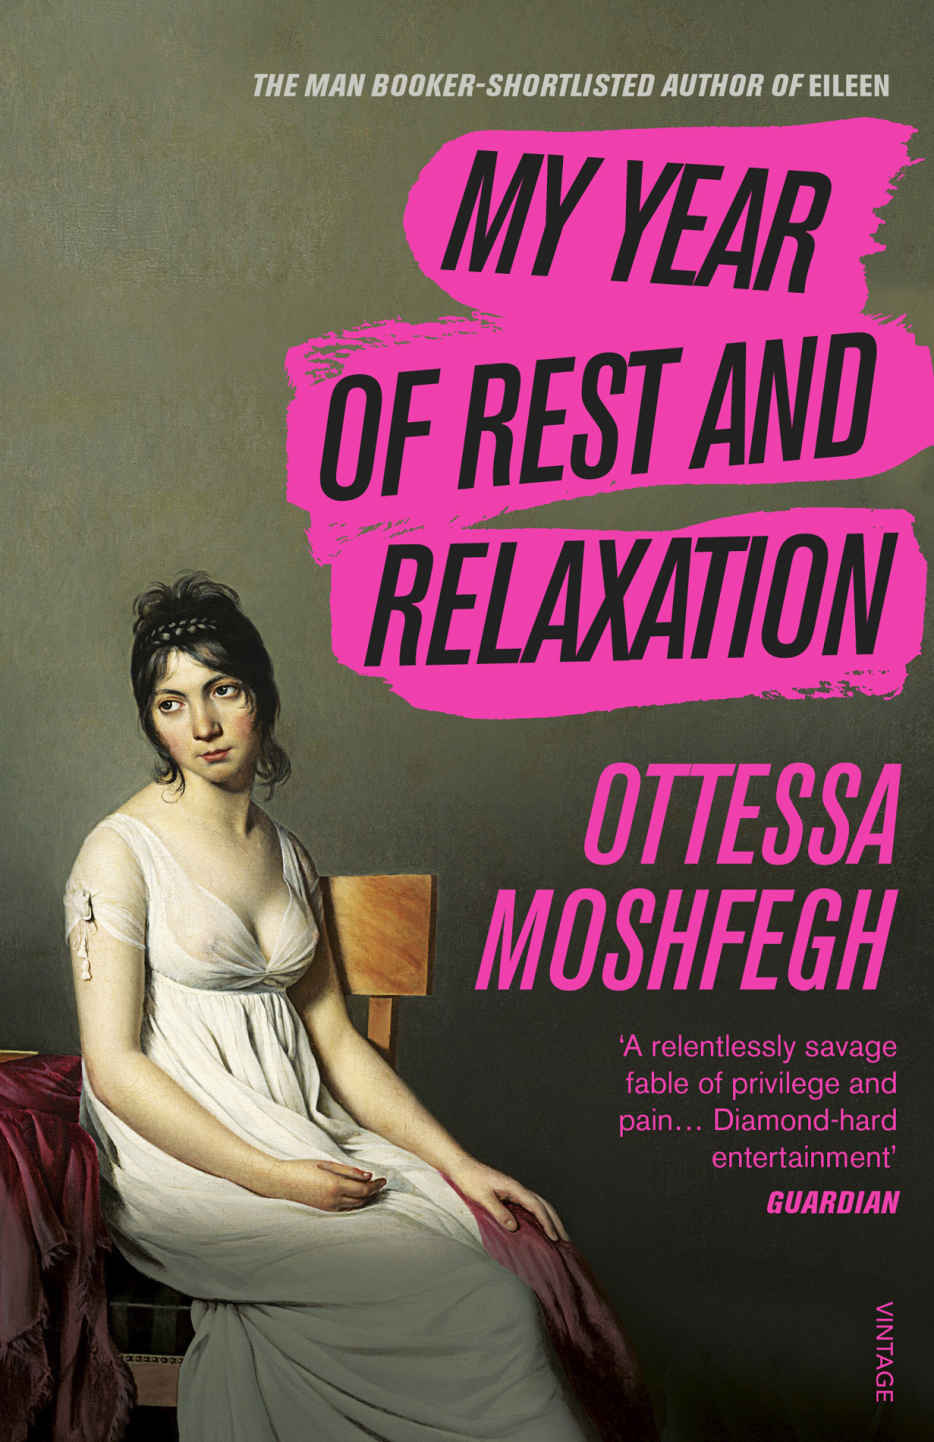 ottessa moshfegh, anne hathaway, authors ottessa moshfegh and luke goebel on movies and their marriage: ‘are people titillated by unlikeable women?’